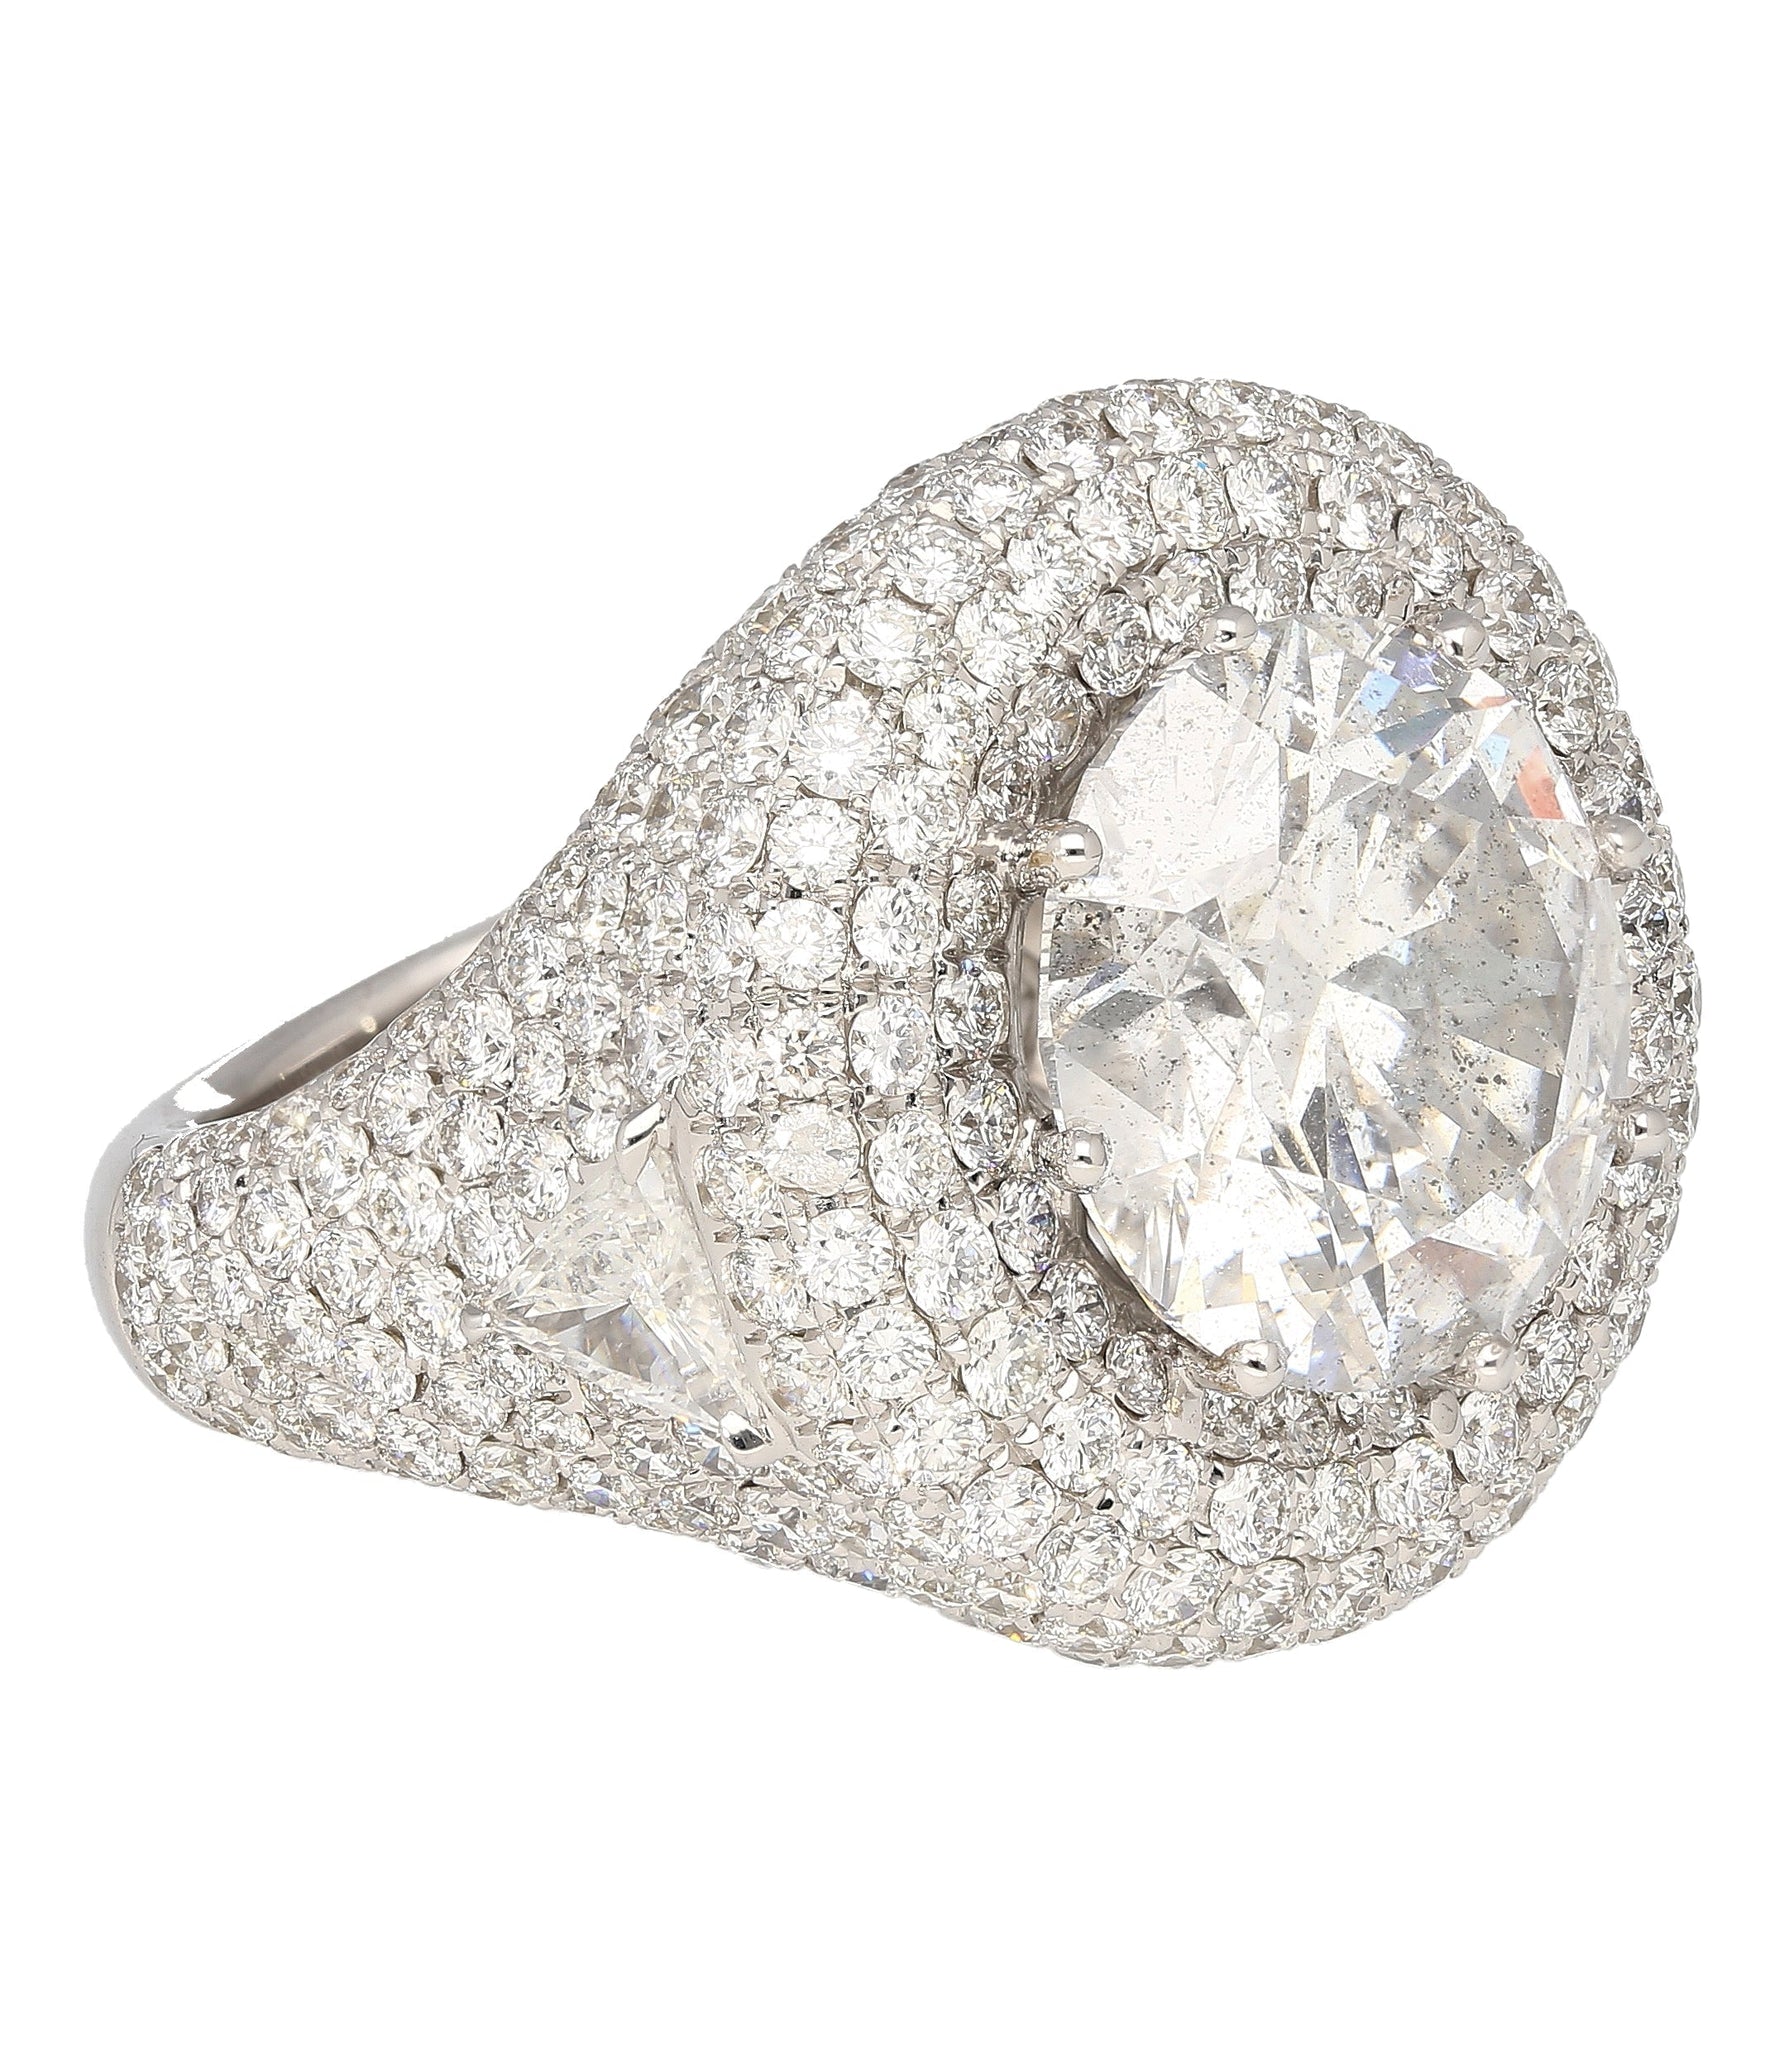 7.71 Carat Round Cut I2 Natural Diamond Cluster Ring in 18K White Gold